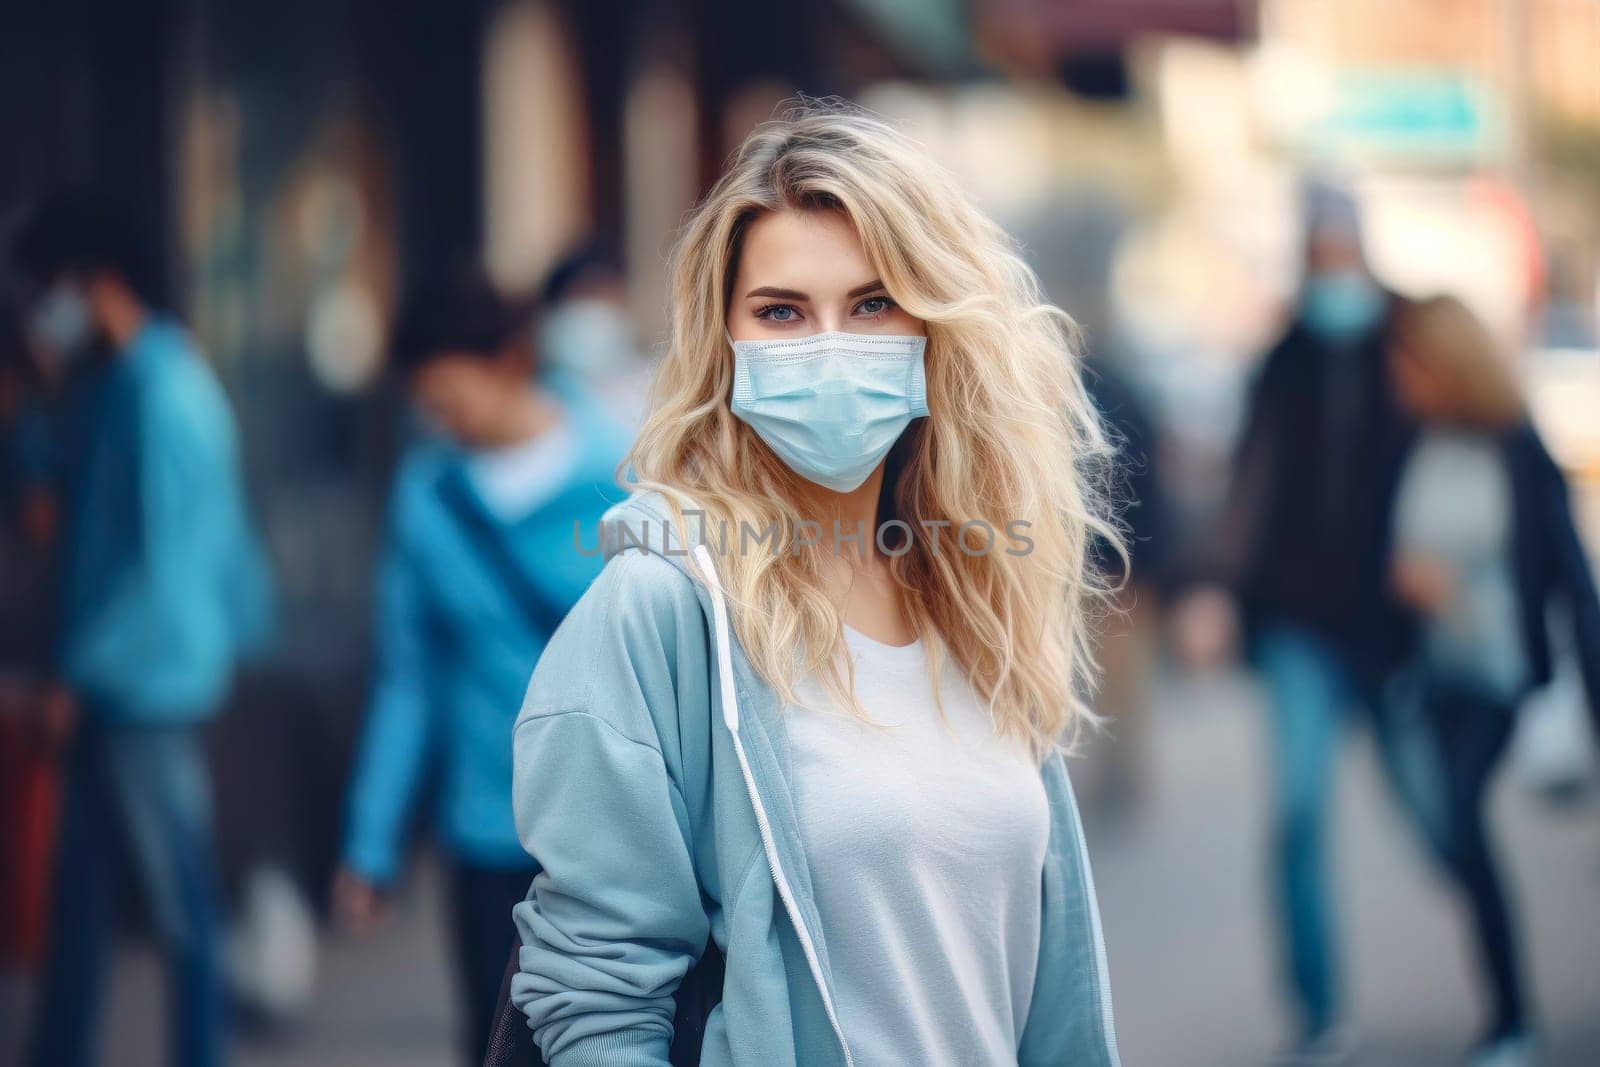 Masked Girl Walking in the City during Pandemic by pippocarlot